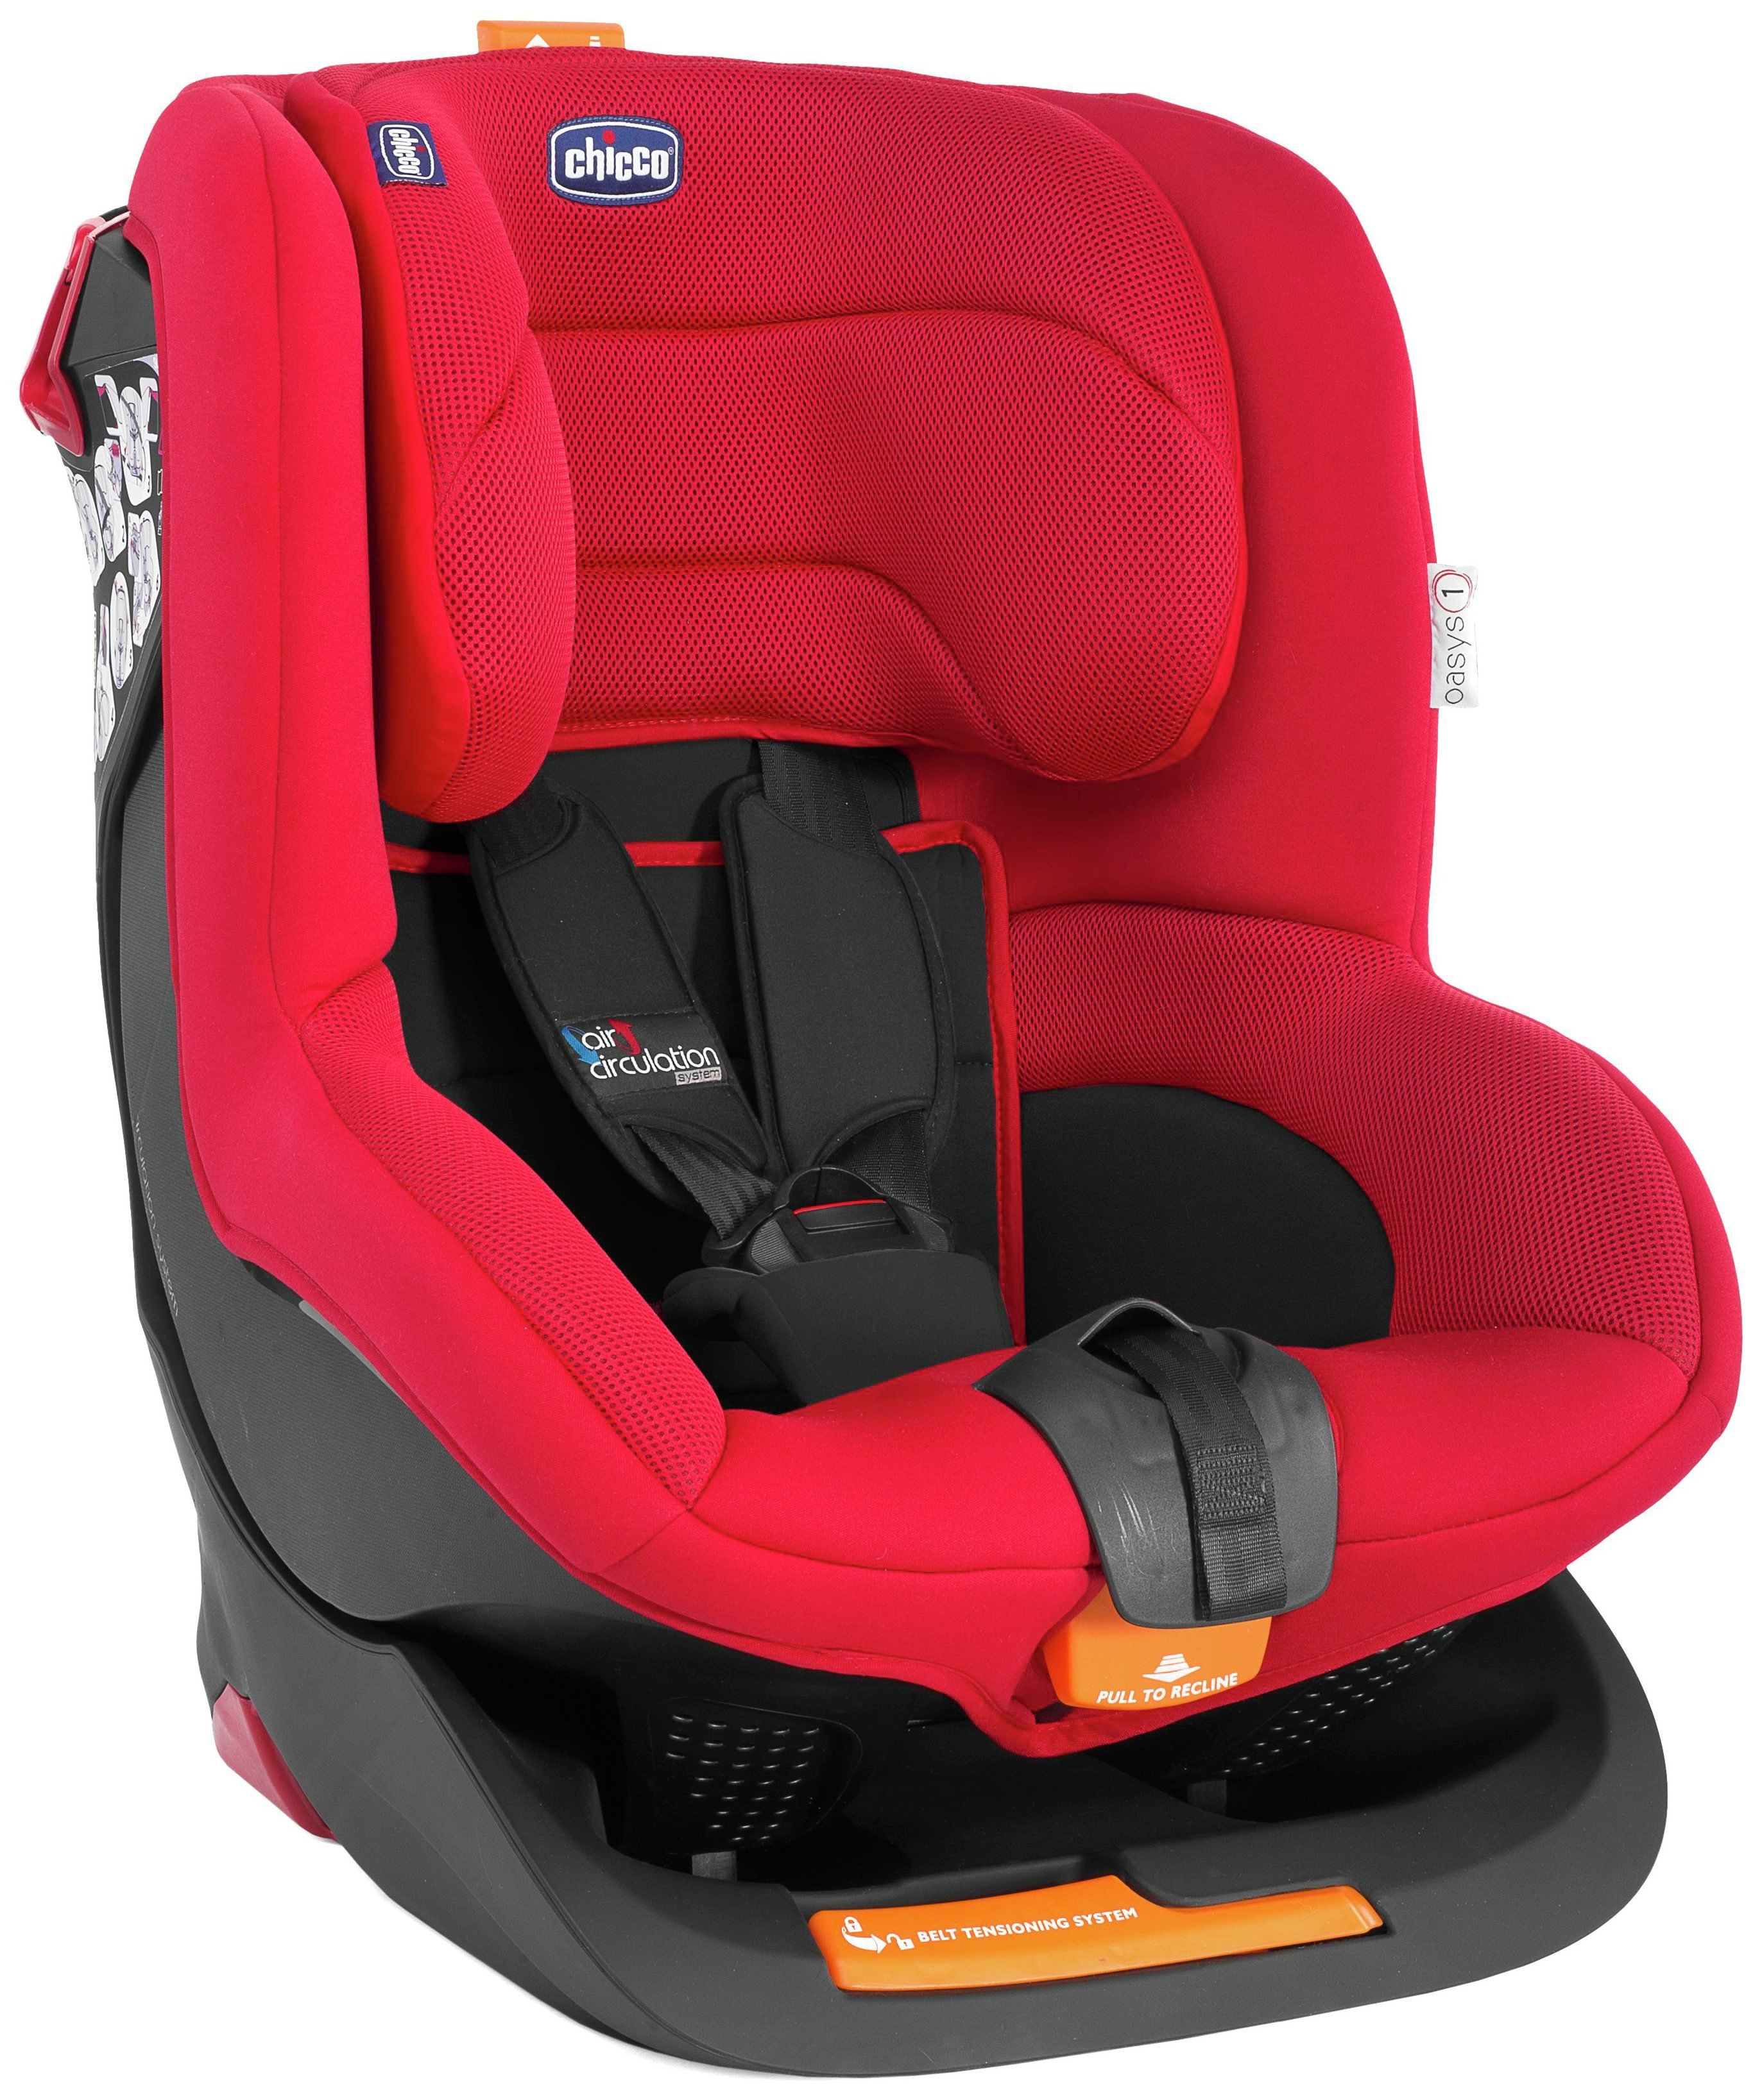 Chicco Oasys Group 1 Car Seat